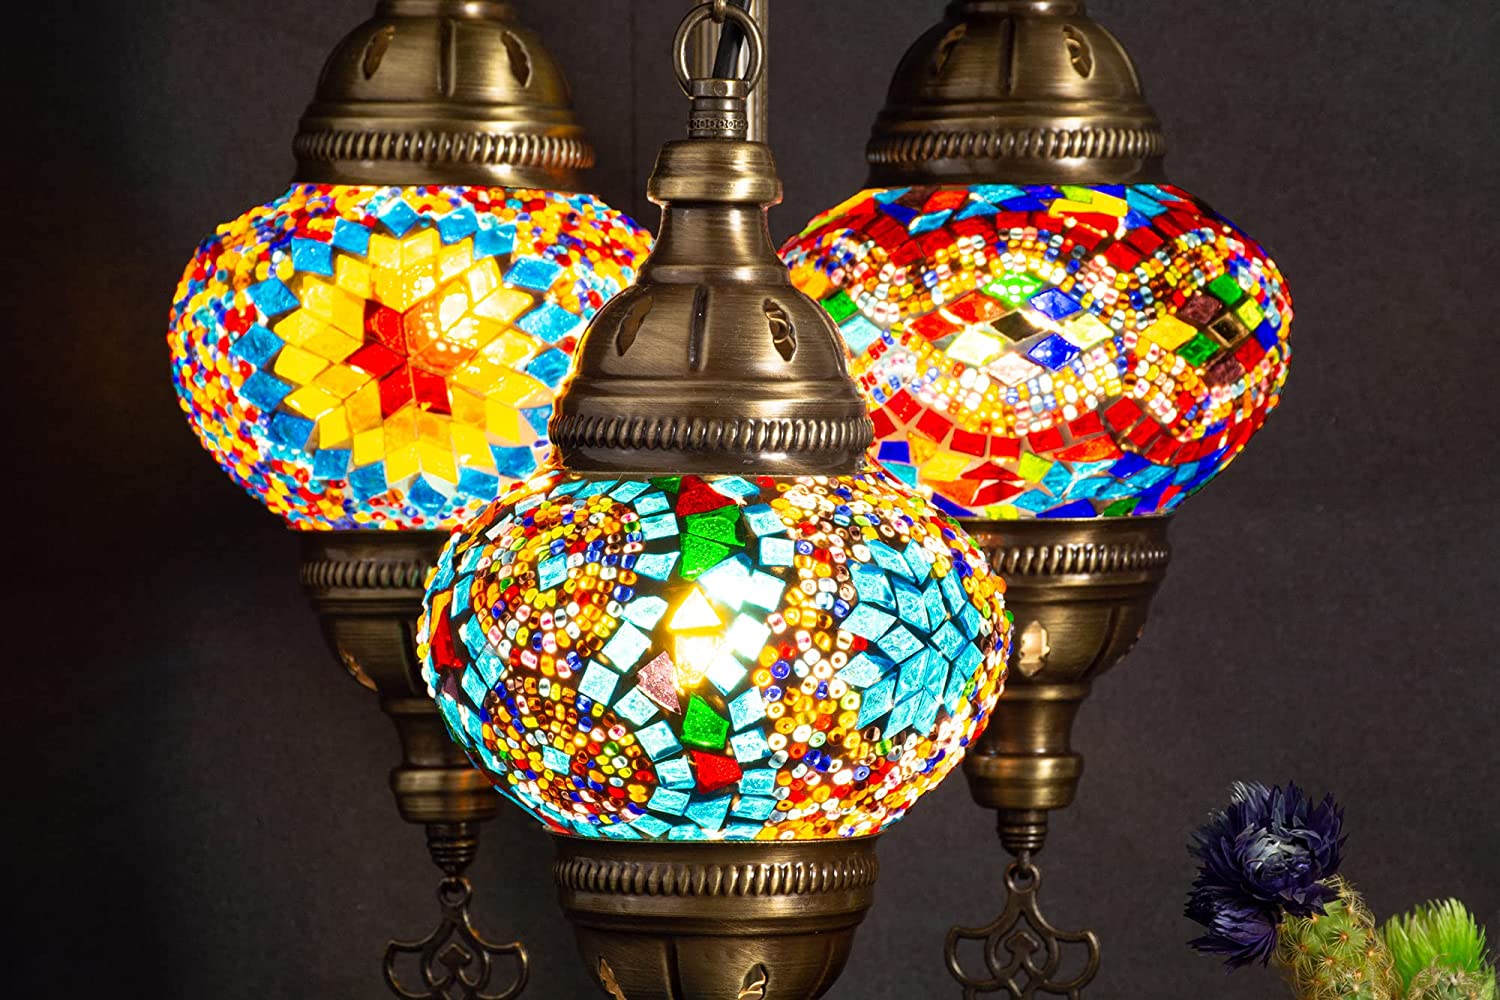 SHADY  Style Turkish Stained Glass Table Lamp  3 Globe Mosaic Moroccan Desk Light  Bohemian Vintage Bedroom Nightstand  Antique Handmade Rustic Decor Colorful Lighting (Cappadocia